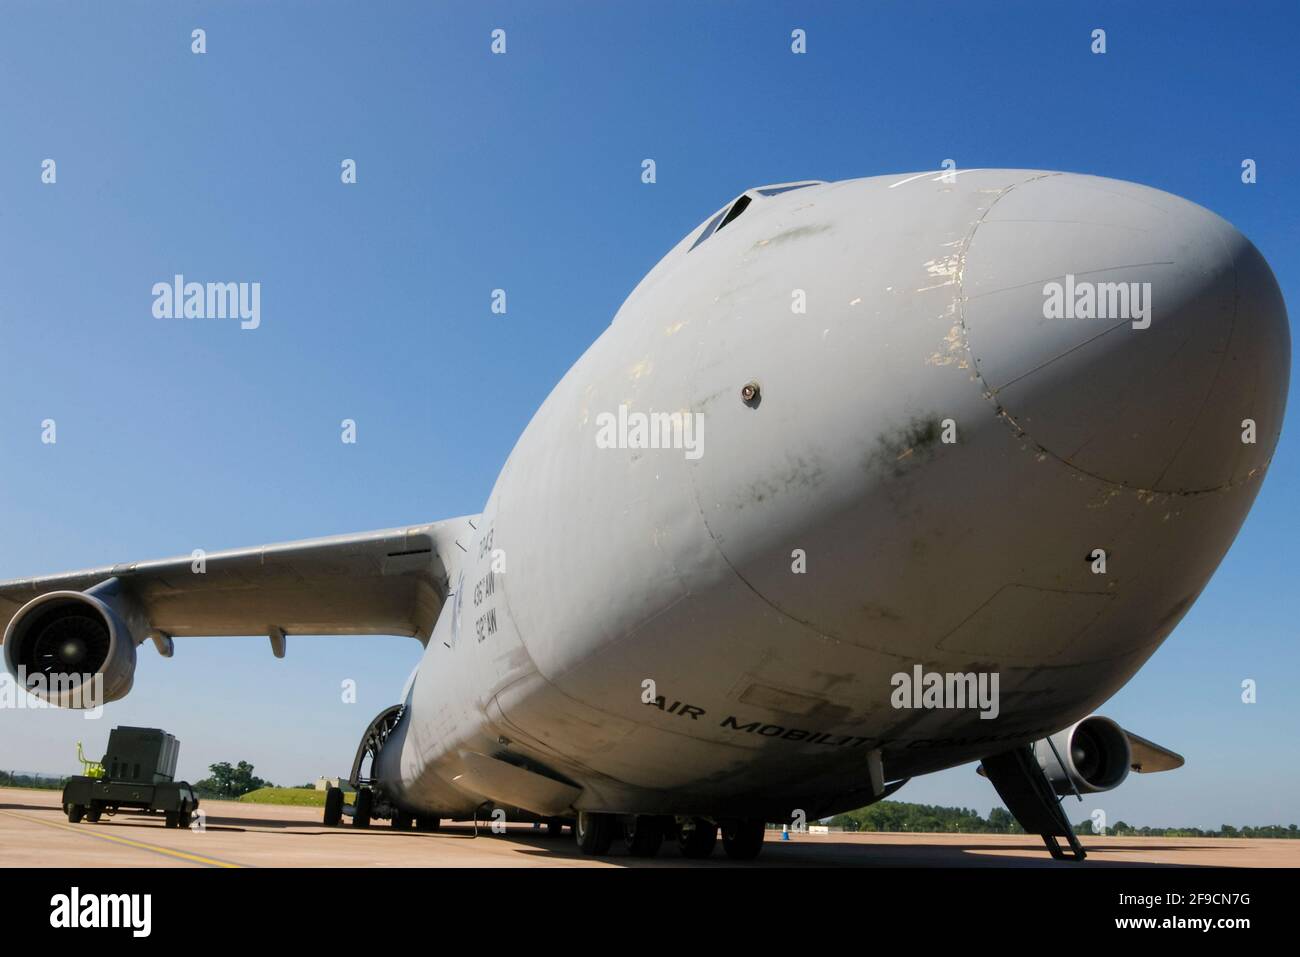 United States Air Force Lockheed C-5 Galaxy large military transport aircraft of Air Mobility Command. Bulbous nose. On display at RIAT 2005 Stock Photo